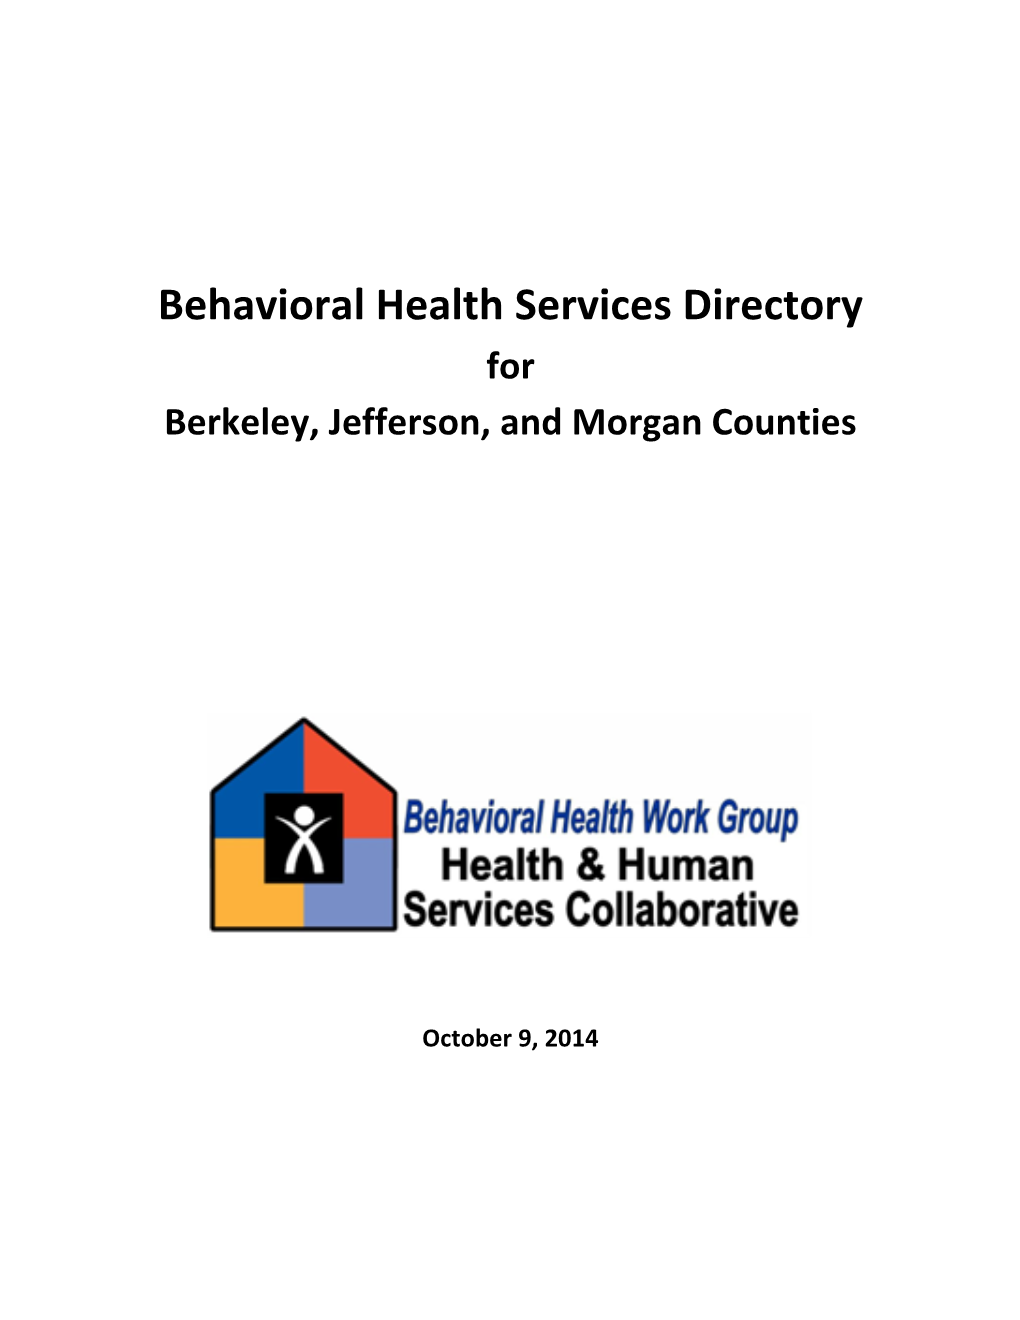 Behavioral Health Services Directory for Berkeley, Jefferson, and Morgan Counties